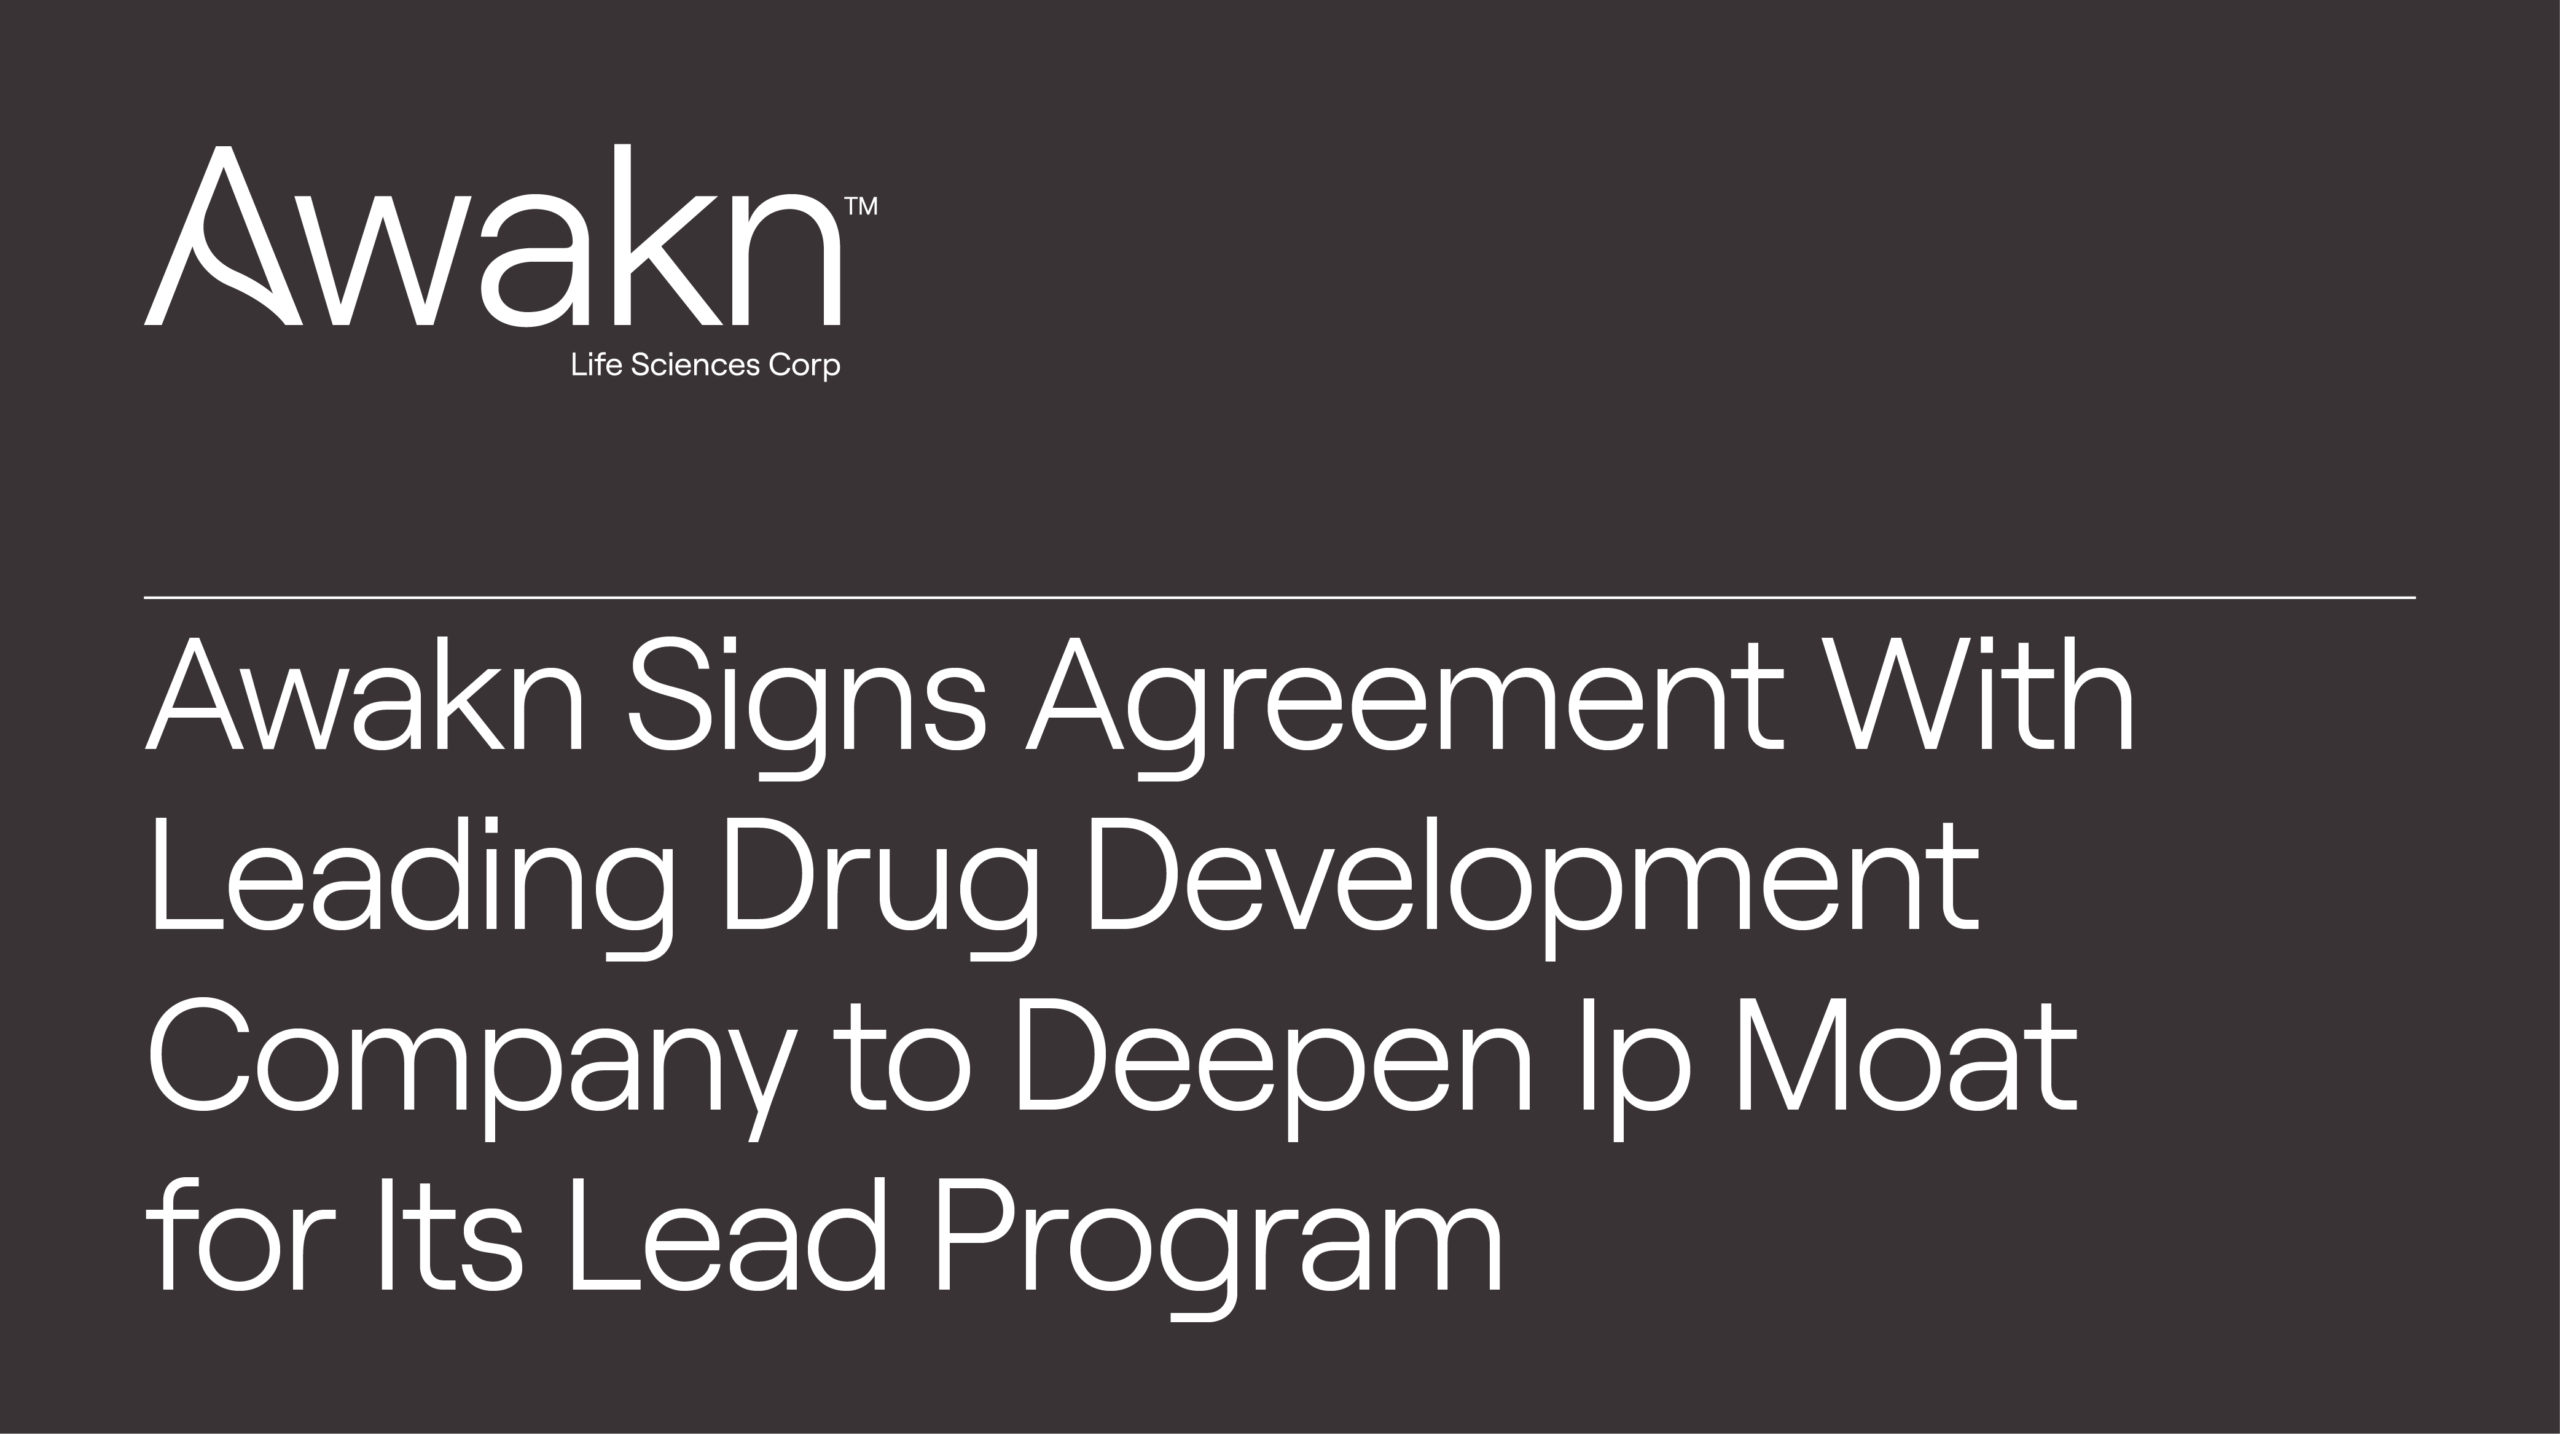 Awakn Signs Agreement With Leading Drug Development Company To Deepen Ip Moat For Its Lead Program